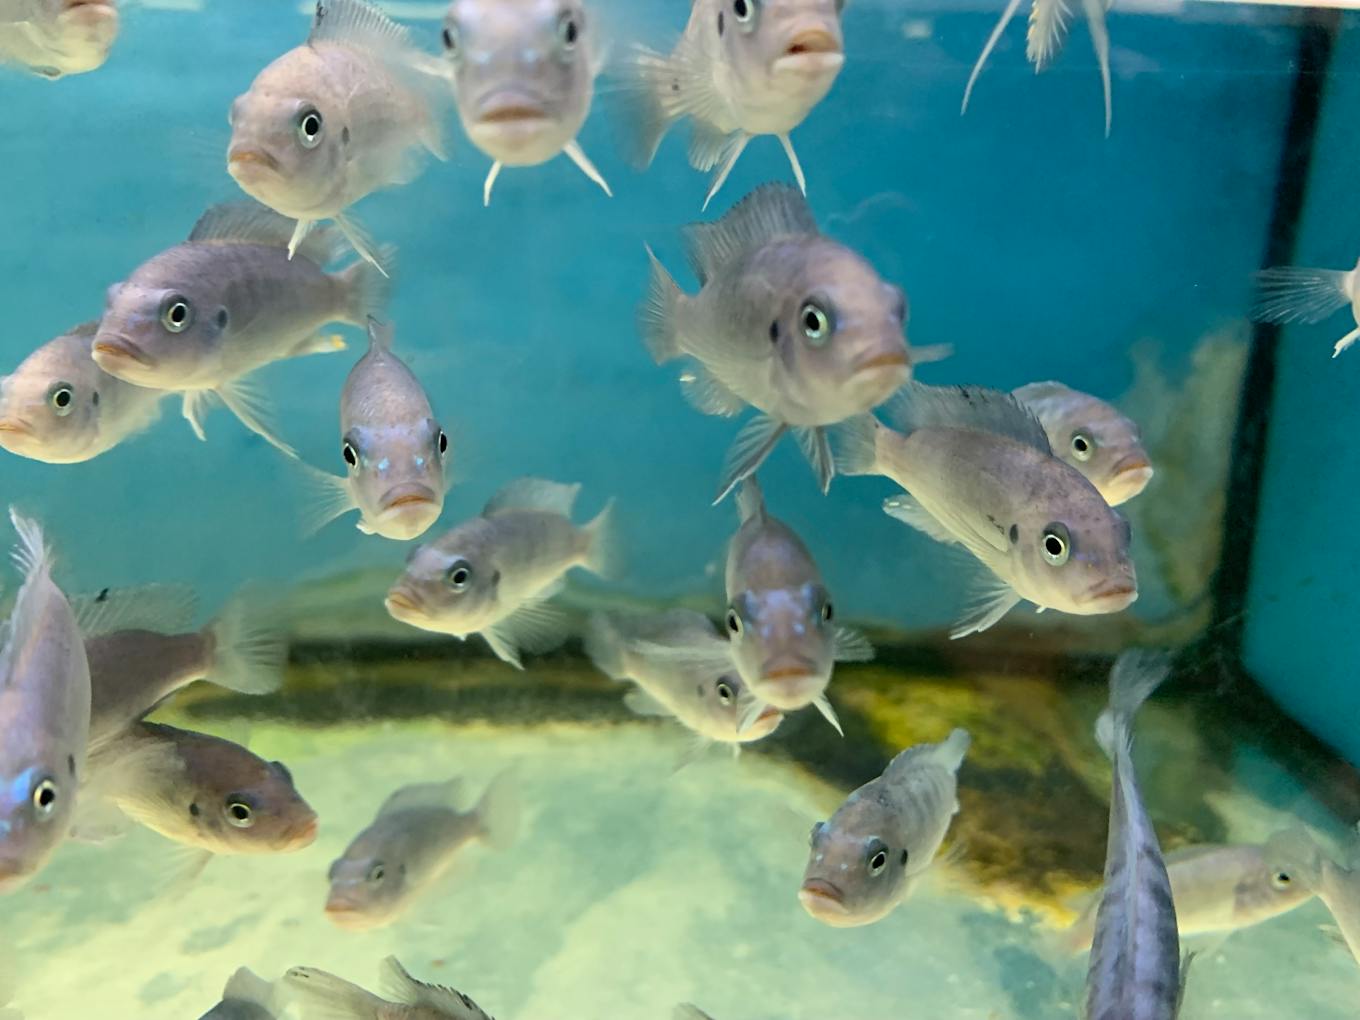 Fish crowd together in a tank with no enrichment in Singapore